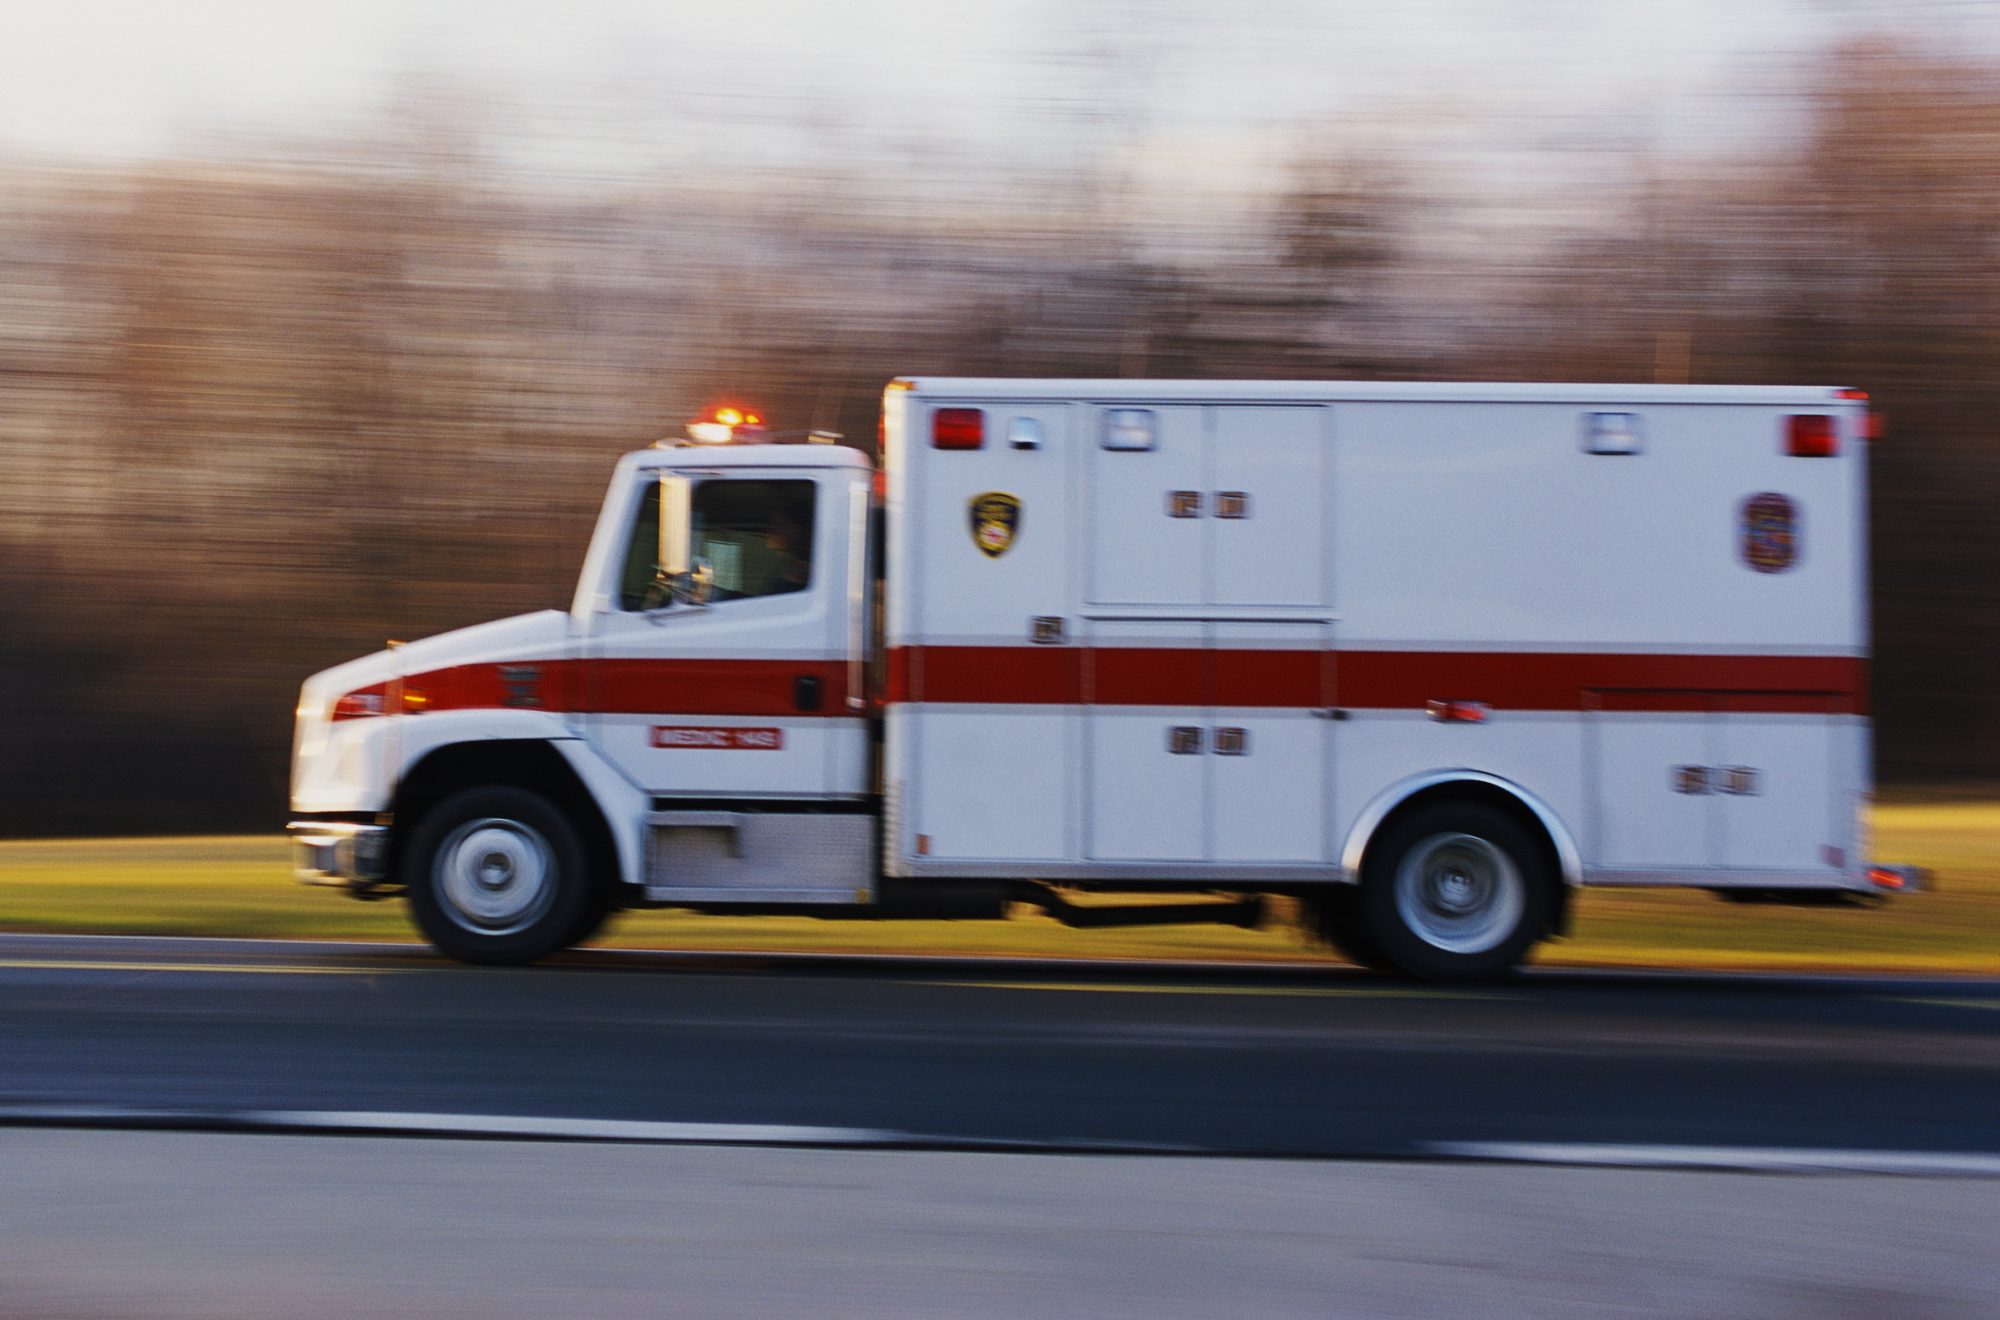 An image of an ambulance on a road.